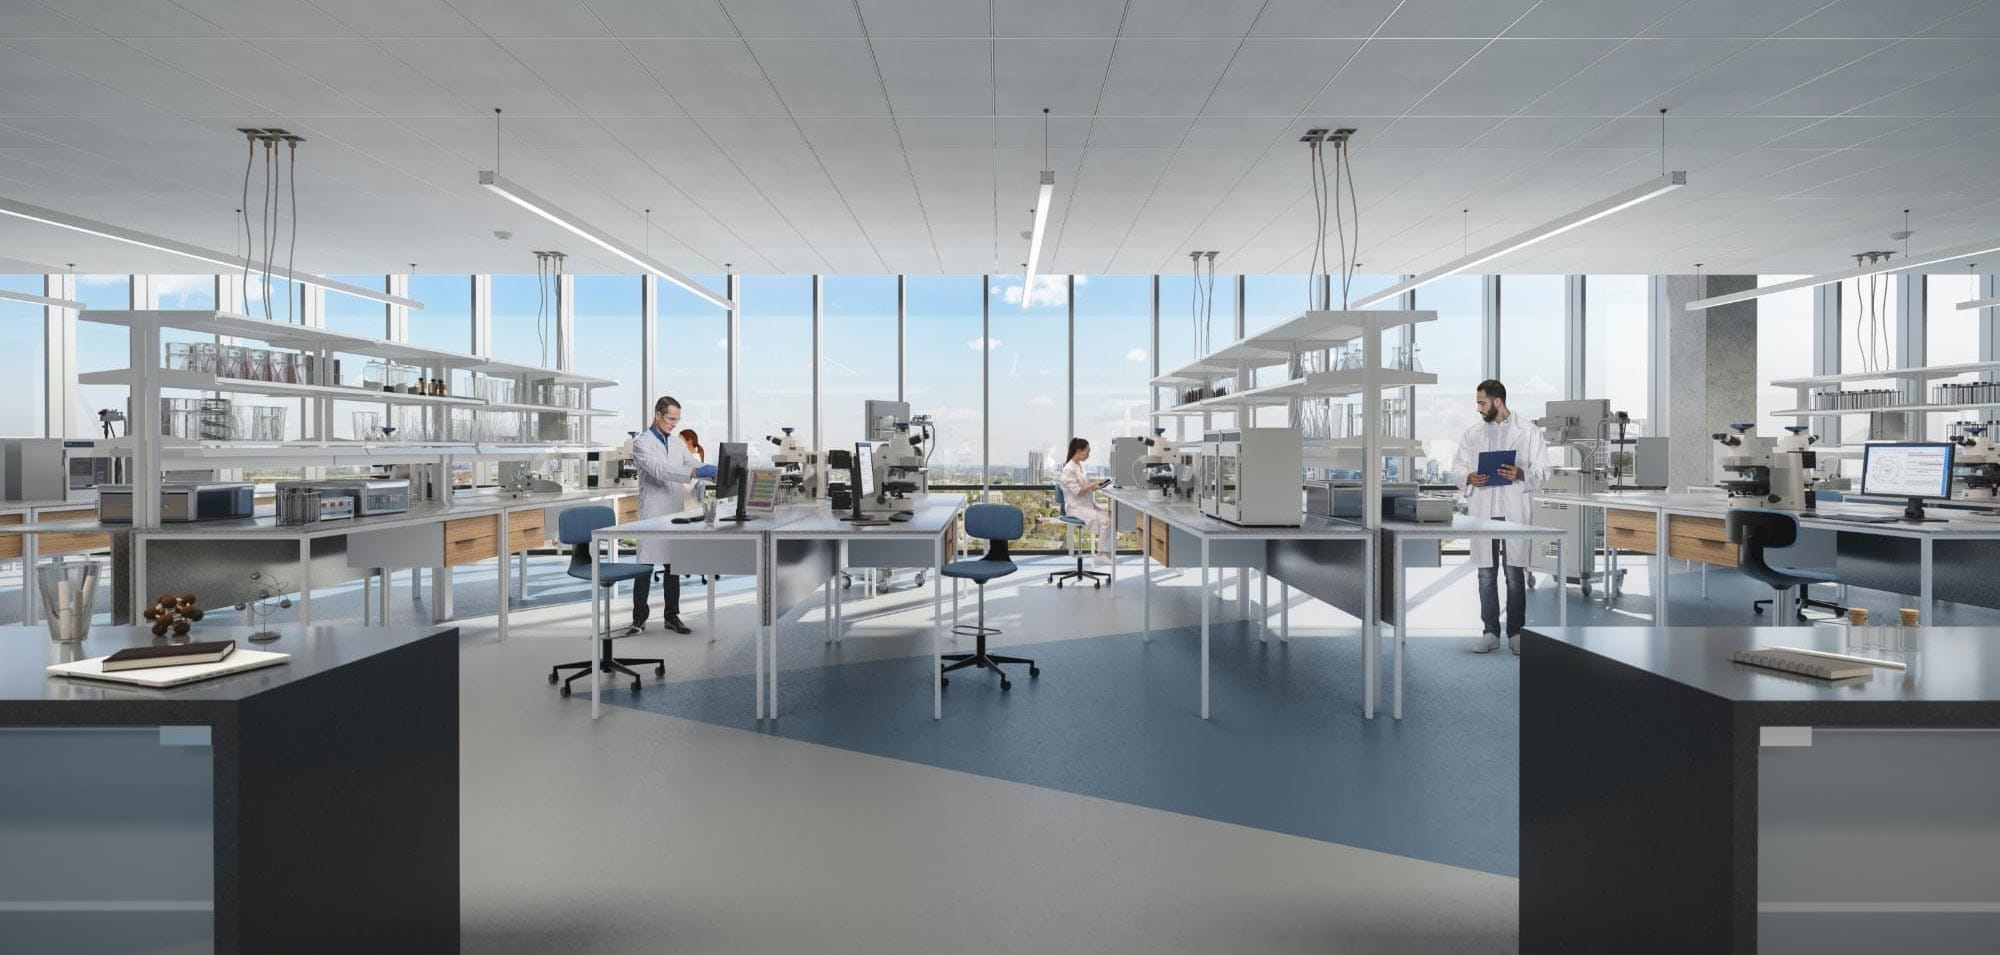 Scientists working in open concept lab space with city views